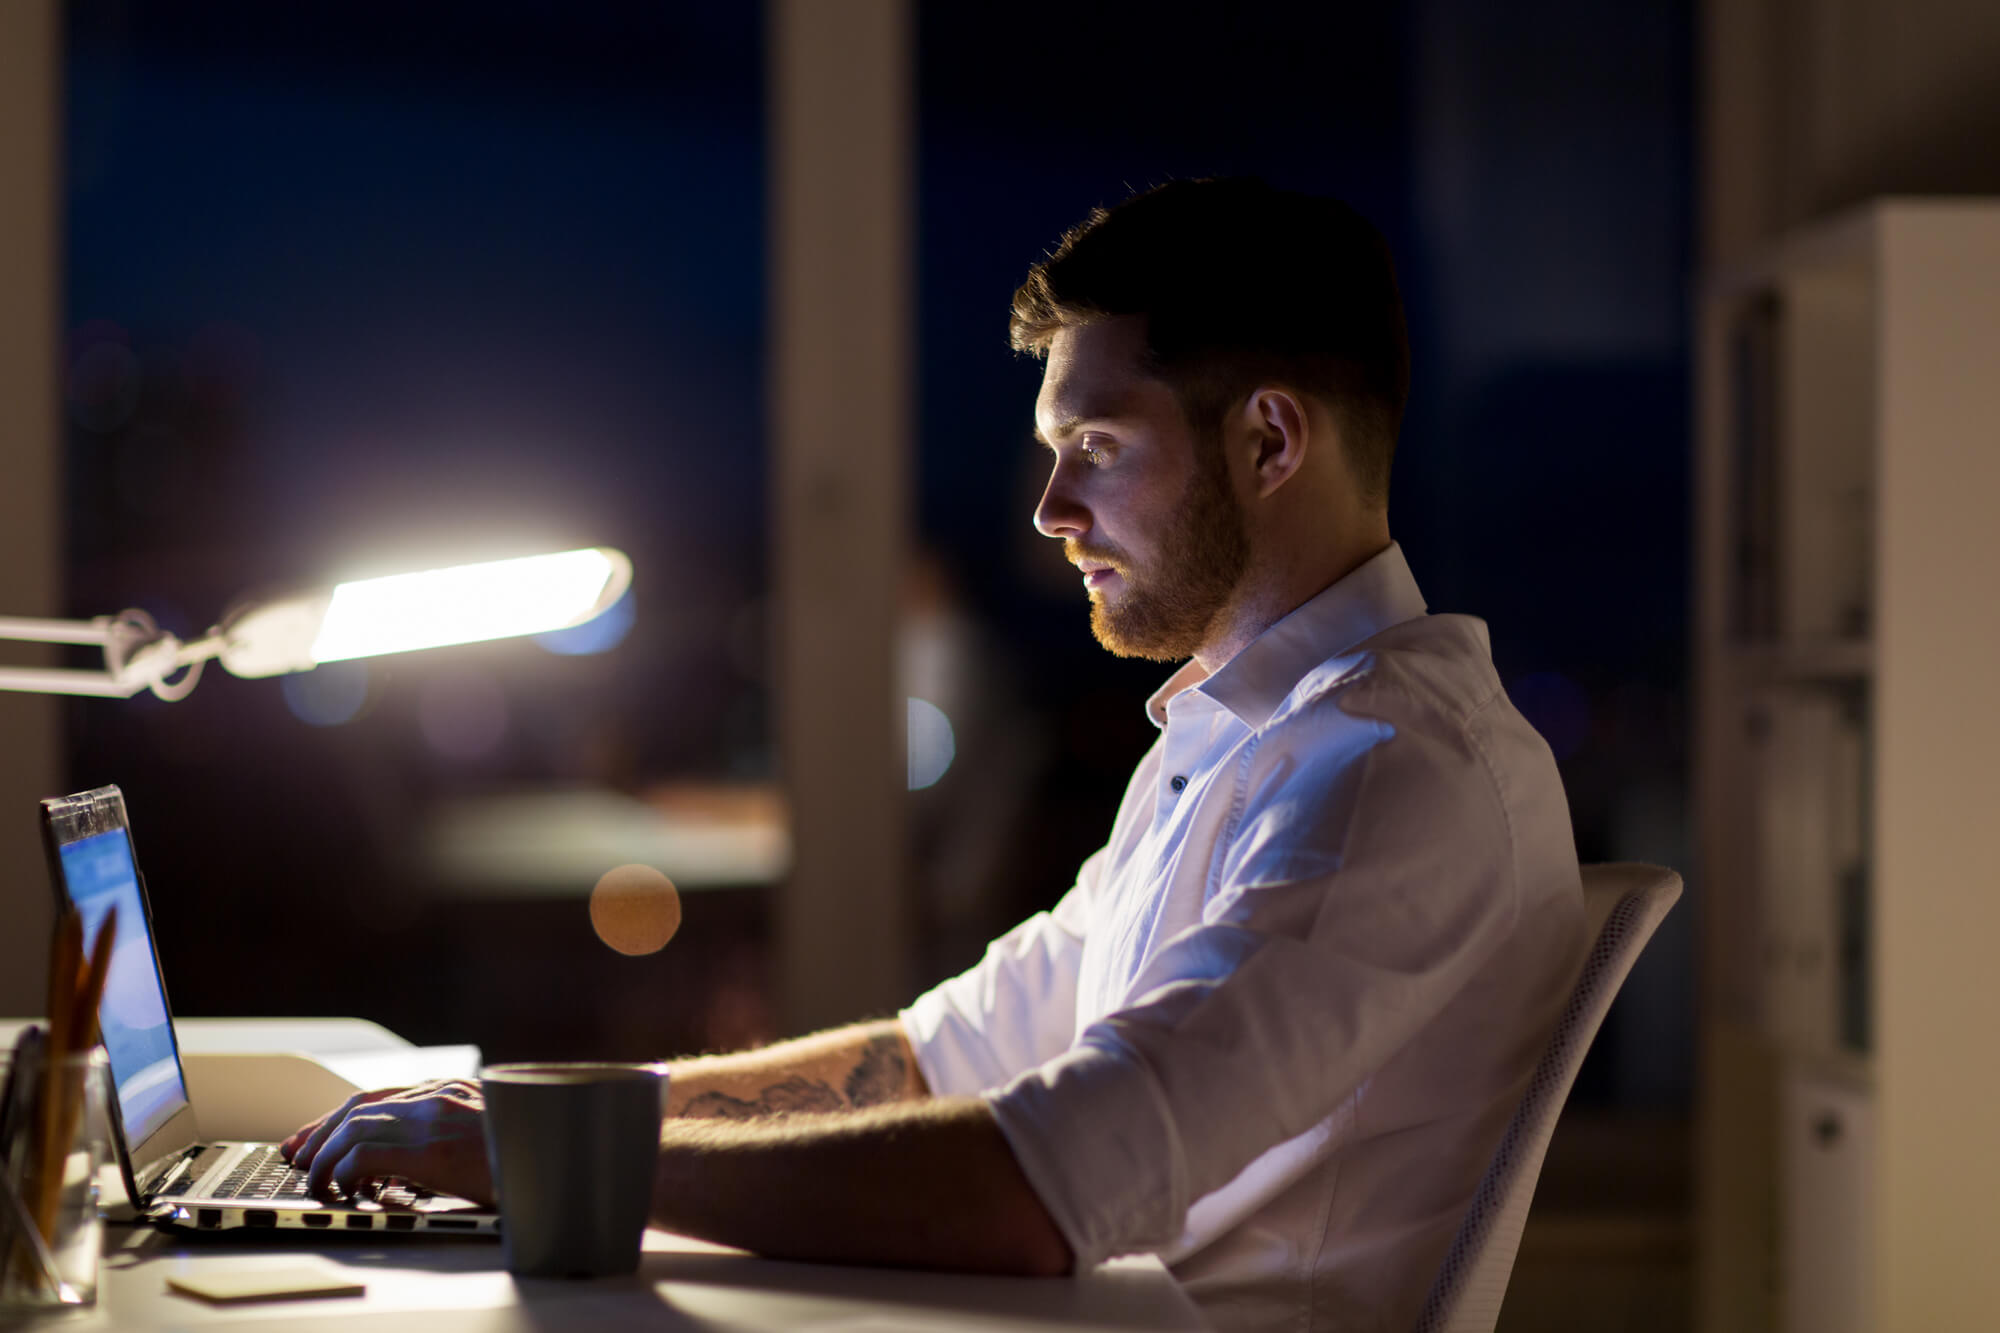 A shift worker sits at his desk at night. Shift work has been connected to low testosterone.